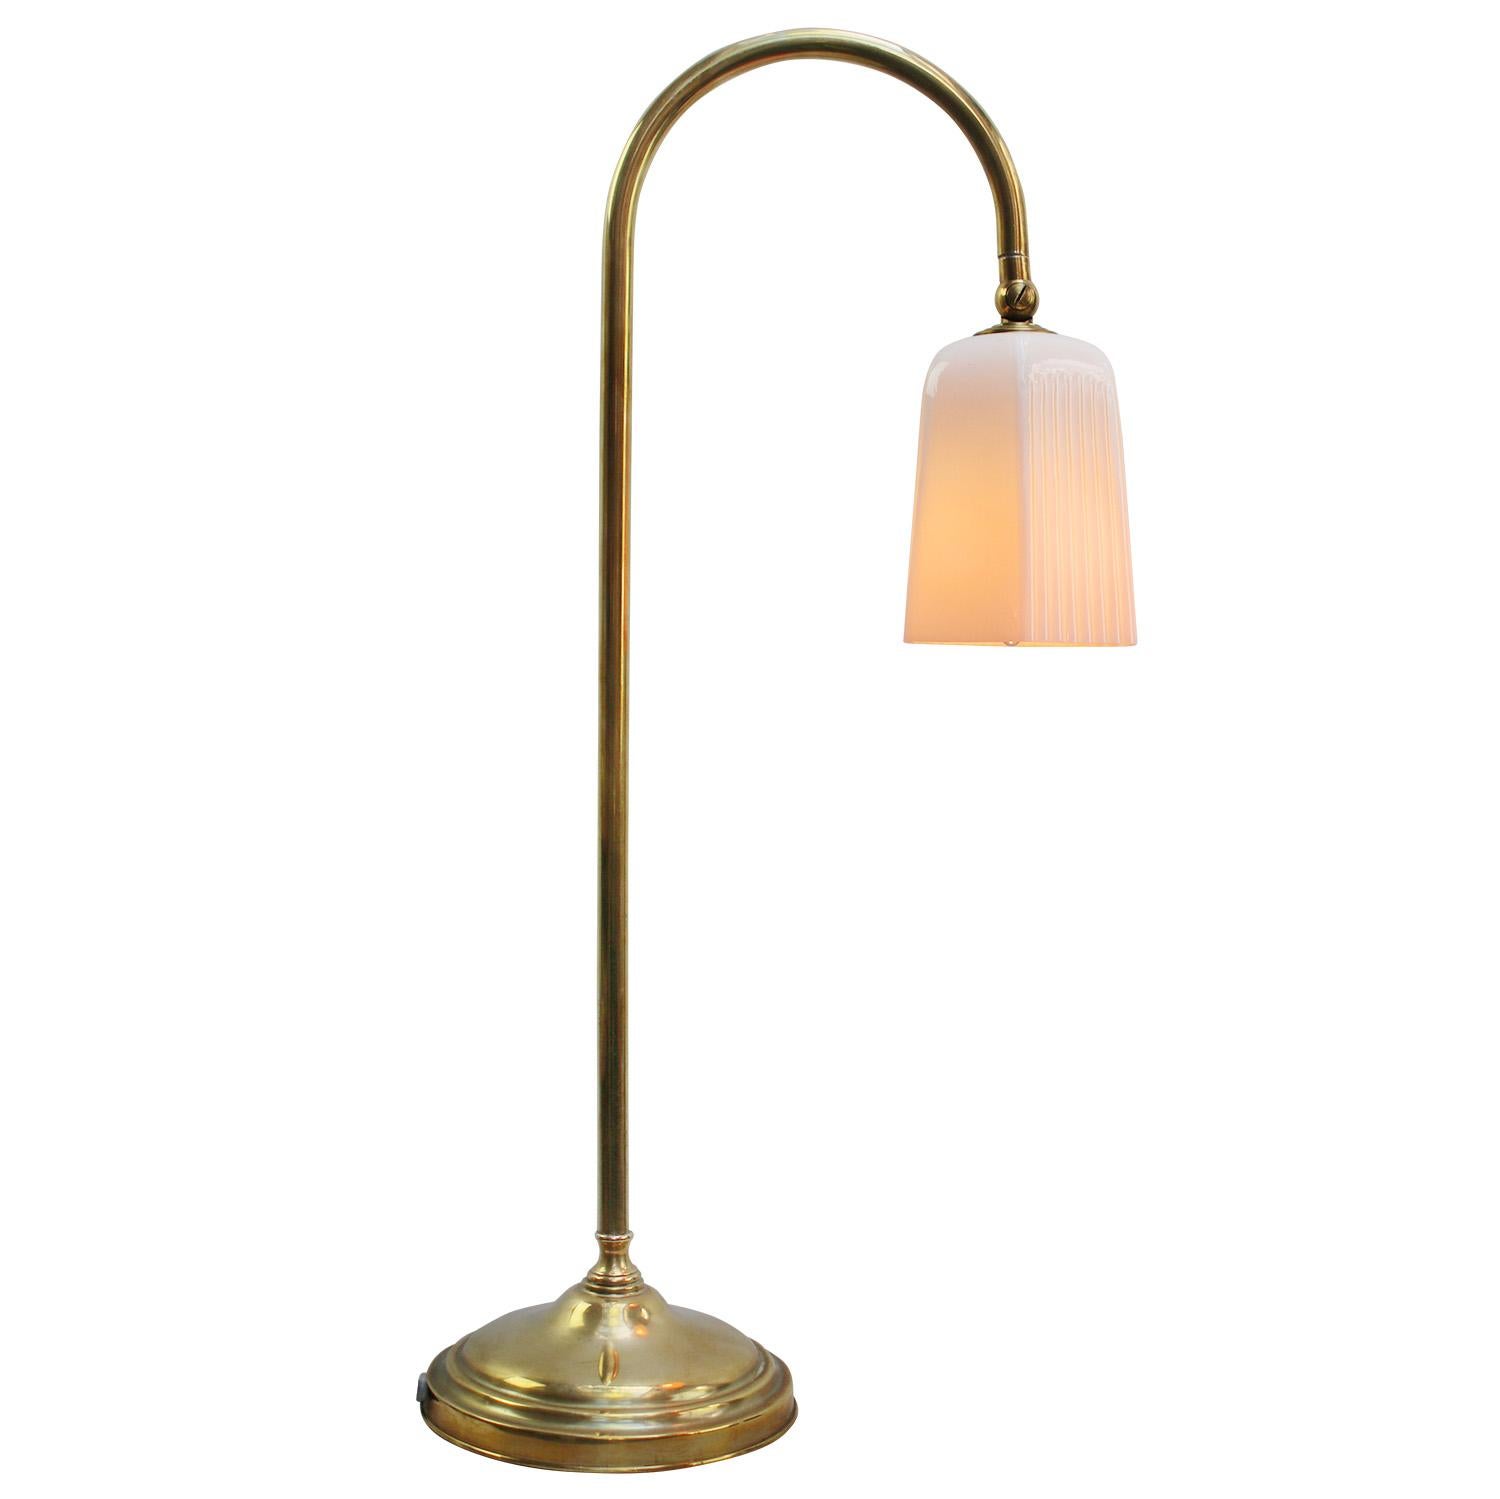 French 1950s brass desk light.
Brass base and arm with opaline glass shade.
Black cotton wire and plug.

E14 bulb holder

Also, available with US/UK plug

E14 bulb holder. Priced per individual item. All lamps have been made suitable by